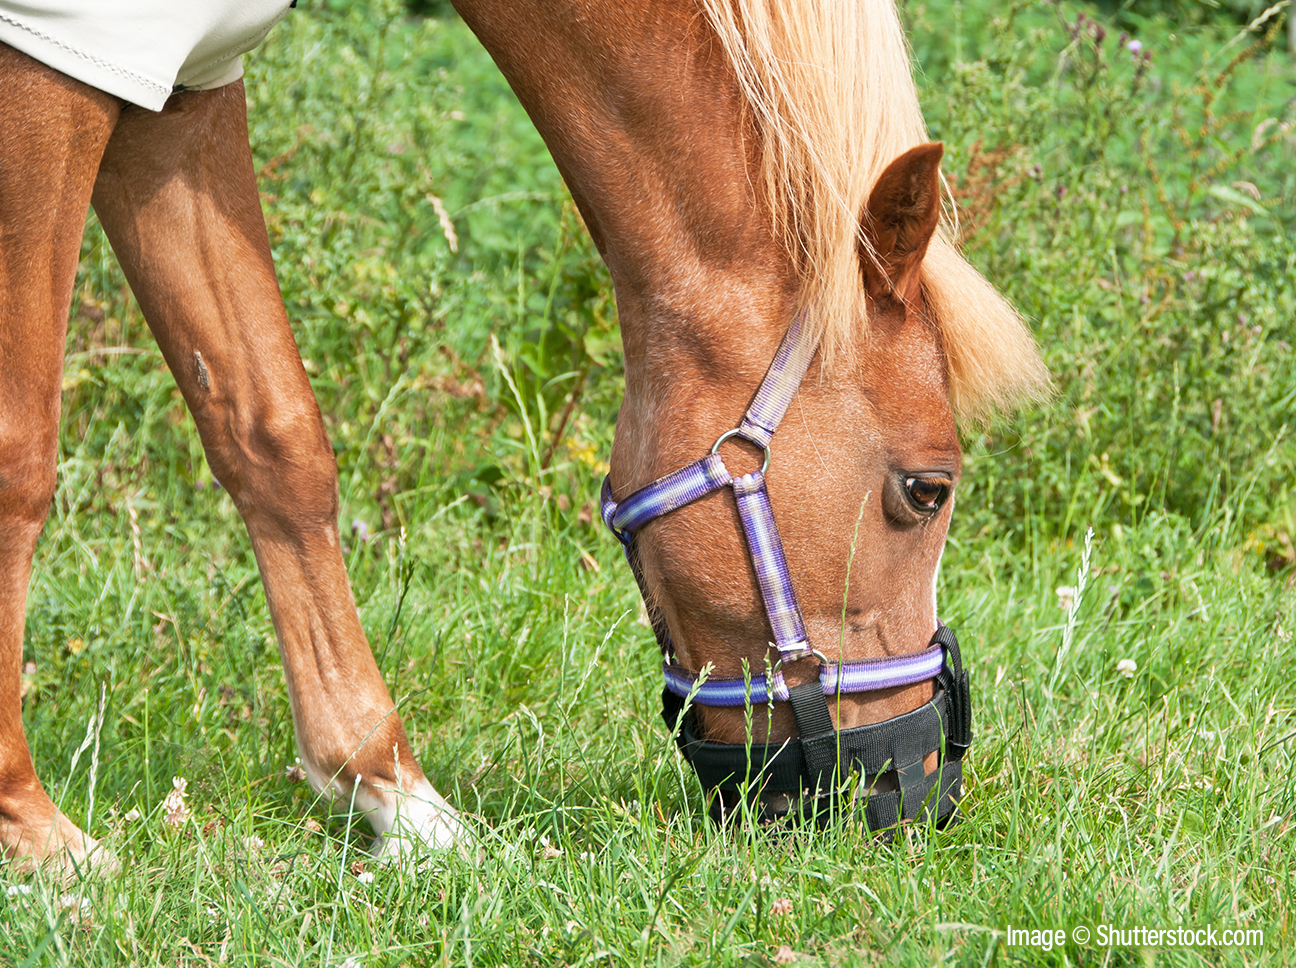 Grazing Muzzles – A Guide To Grazing Muzzles